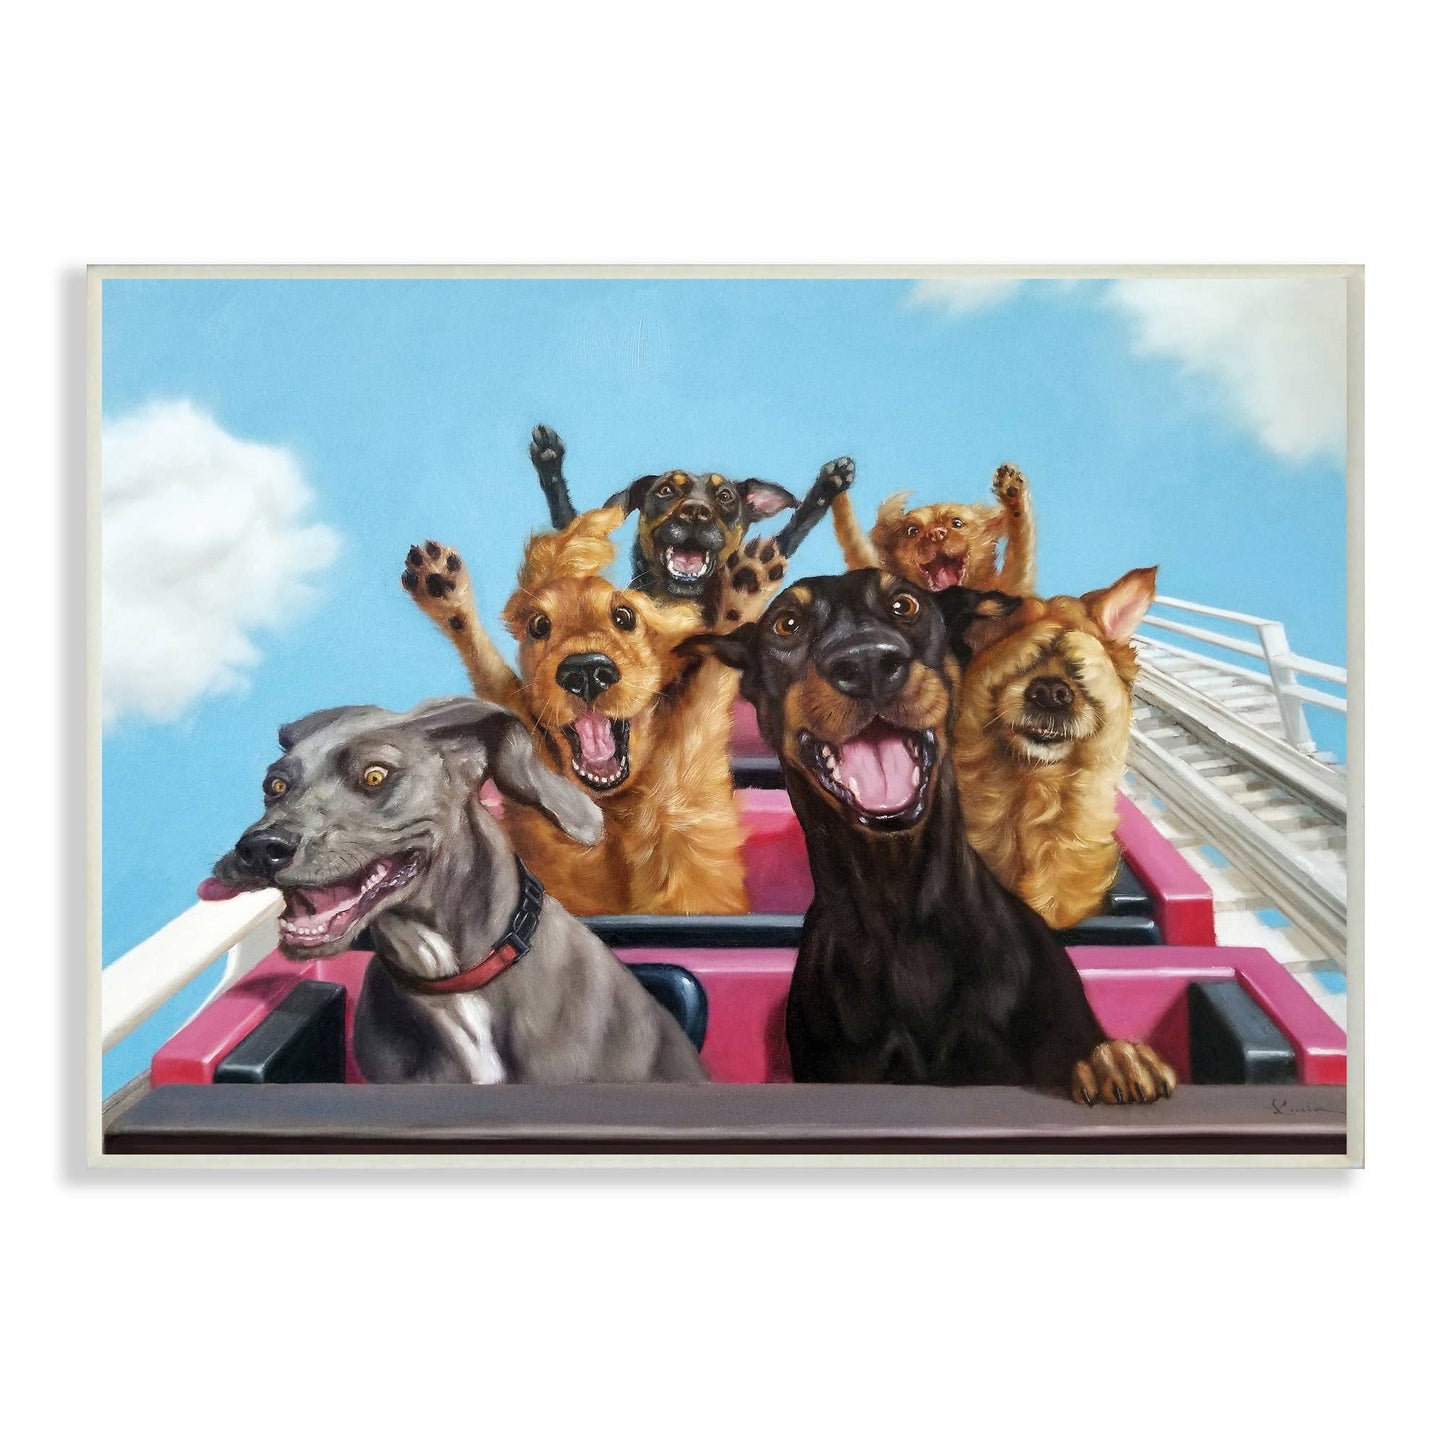 Dogs Riding Roller Coaster Wall Plaque